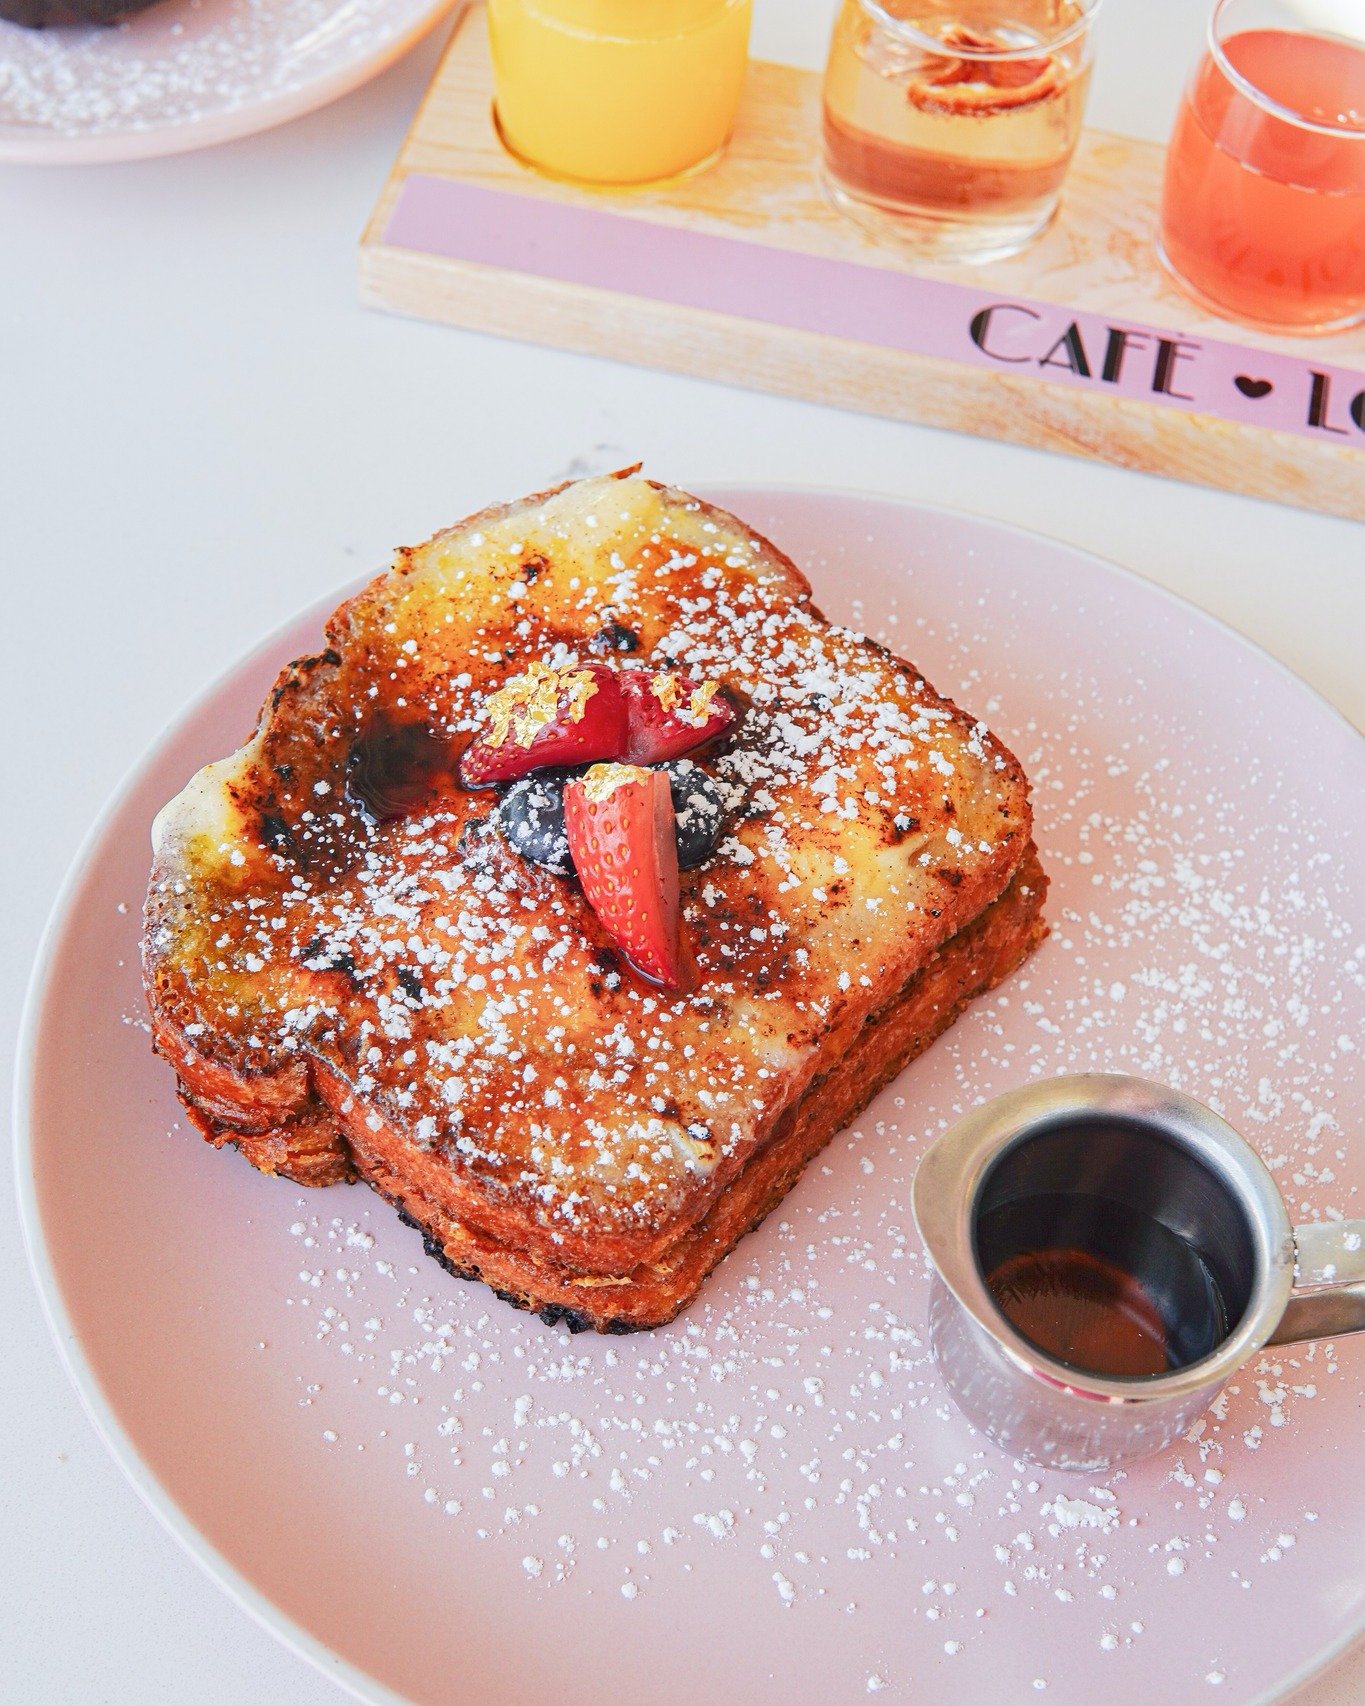 Love at first bite 😍 

Our Cr&eacute;me Brulee French Toast is our most popular brunch item, making it a must try next time you stop by!

📍4280 S Hualapai Way, Ste #109 &bull;☎️(702)766-5652
📍10075 S Eastern Ave., #109 ☎️(702) 840-3362
📍7379 S Ra